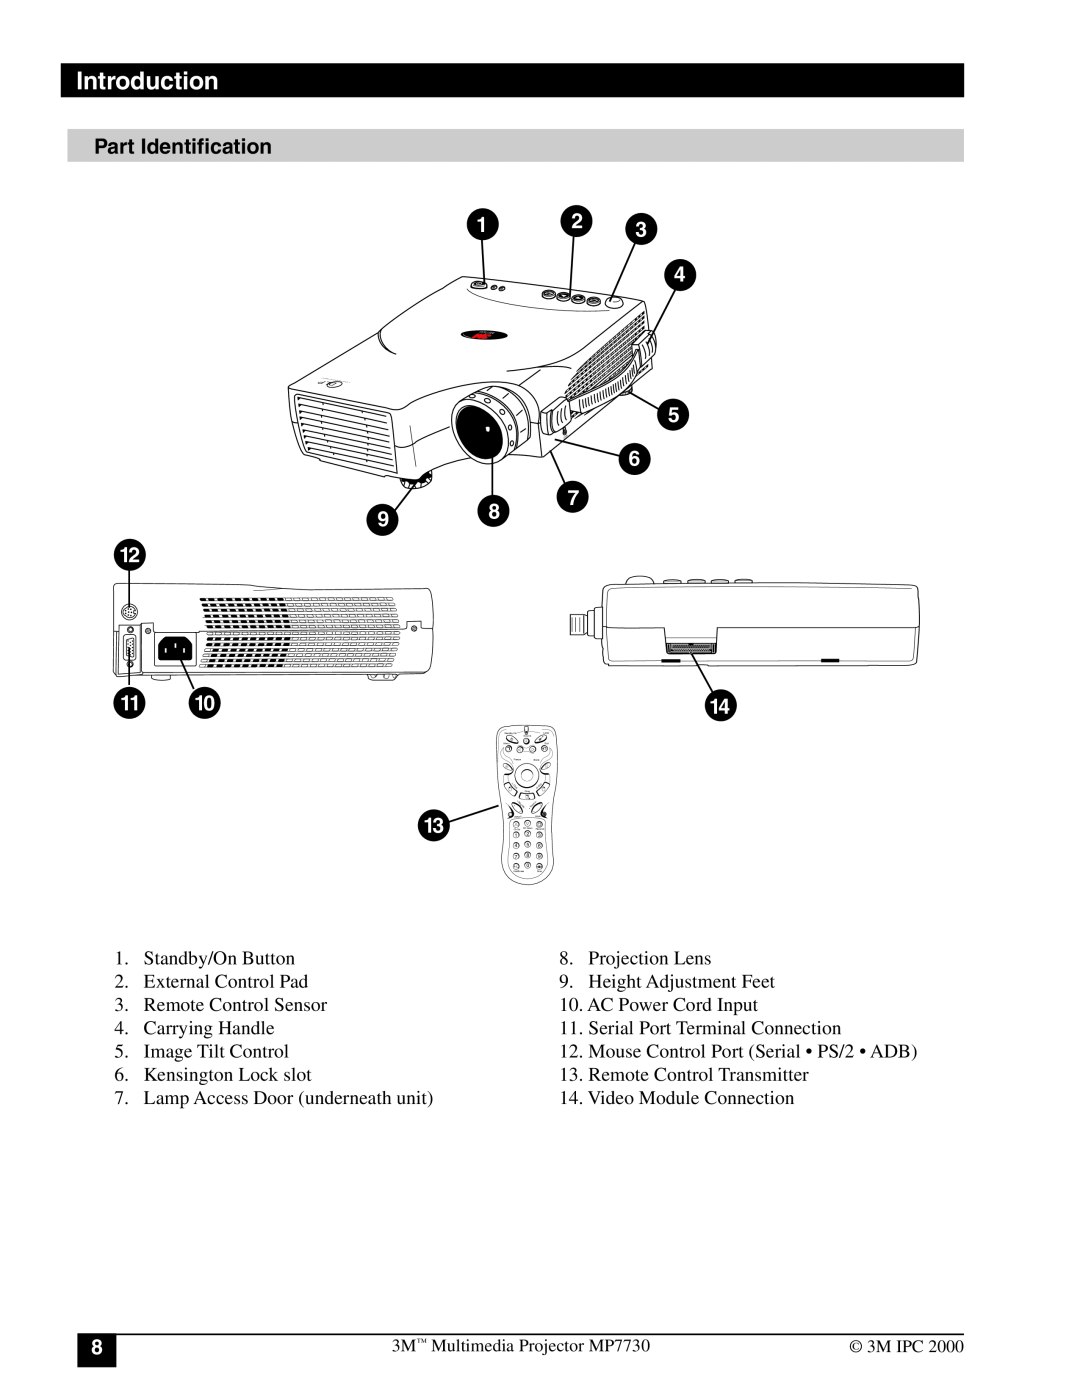 3M MP7730 manual Part Identification, Introduction 